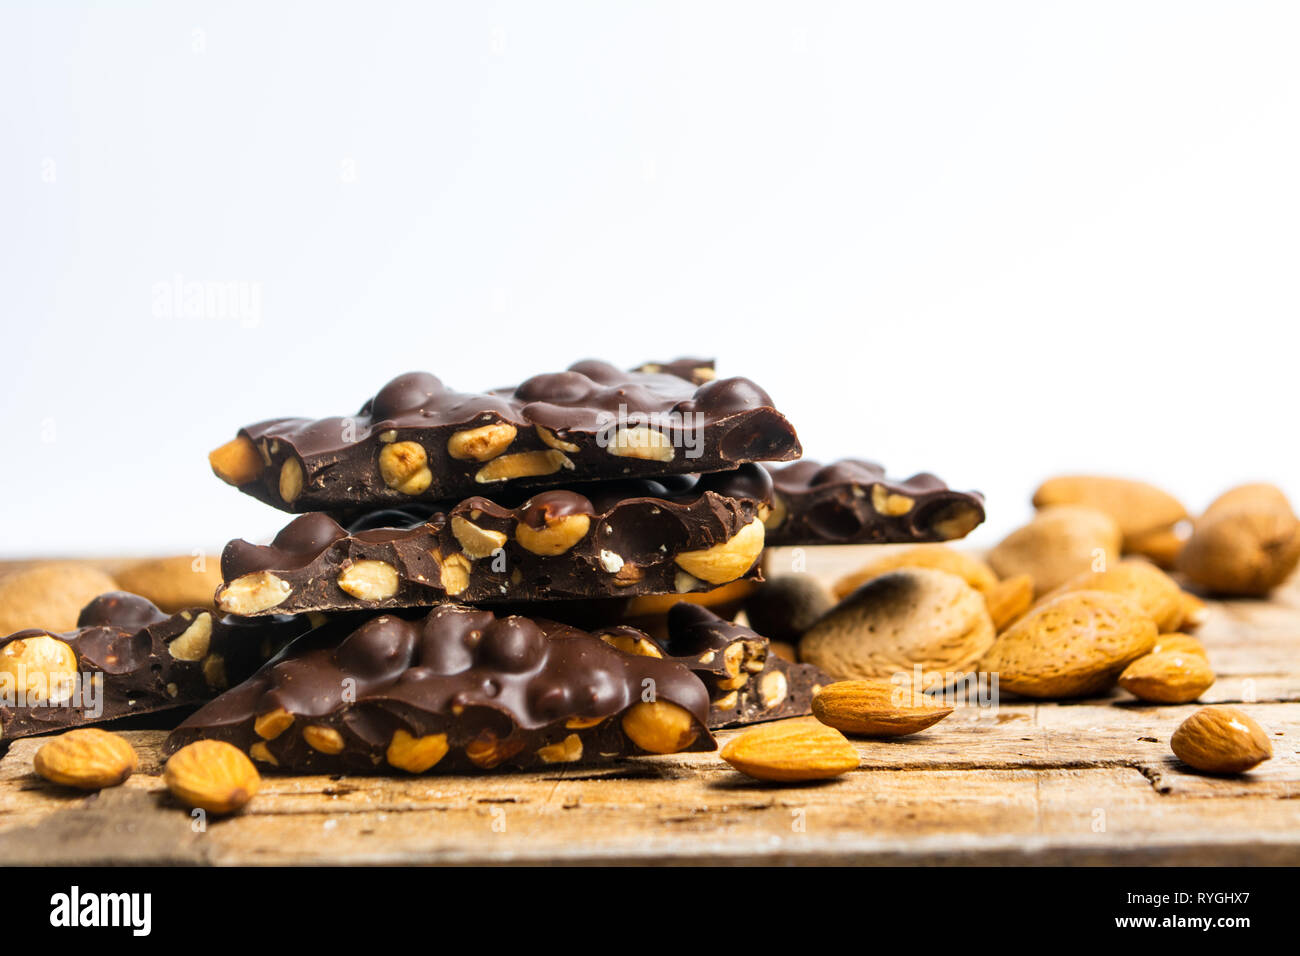 Chocolate pieces with almonds on a table Stock Photo